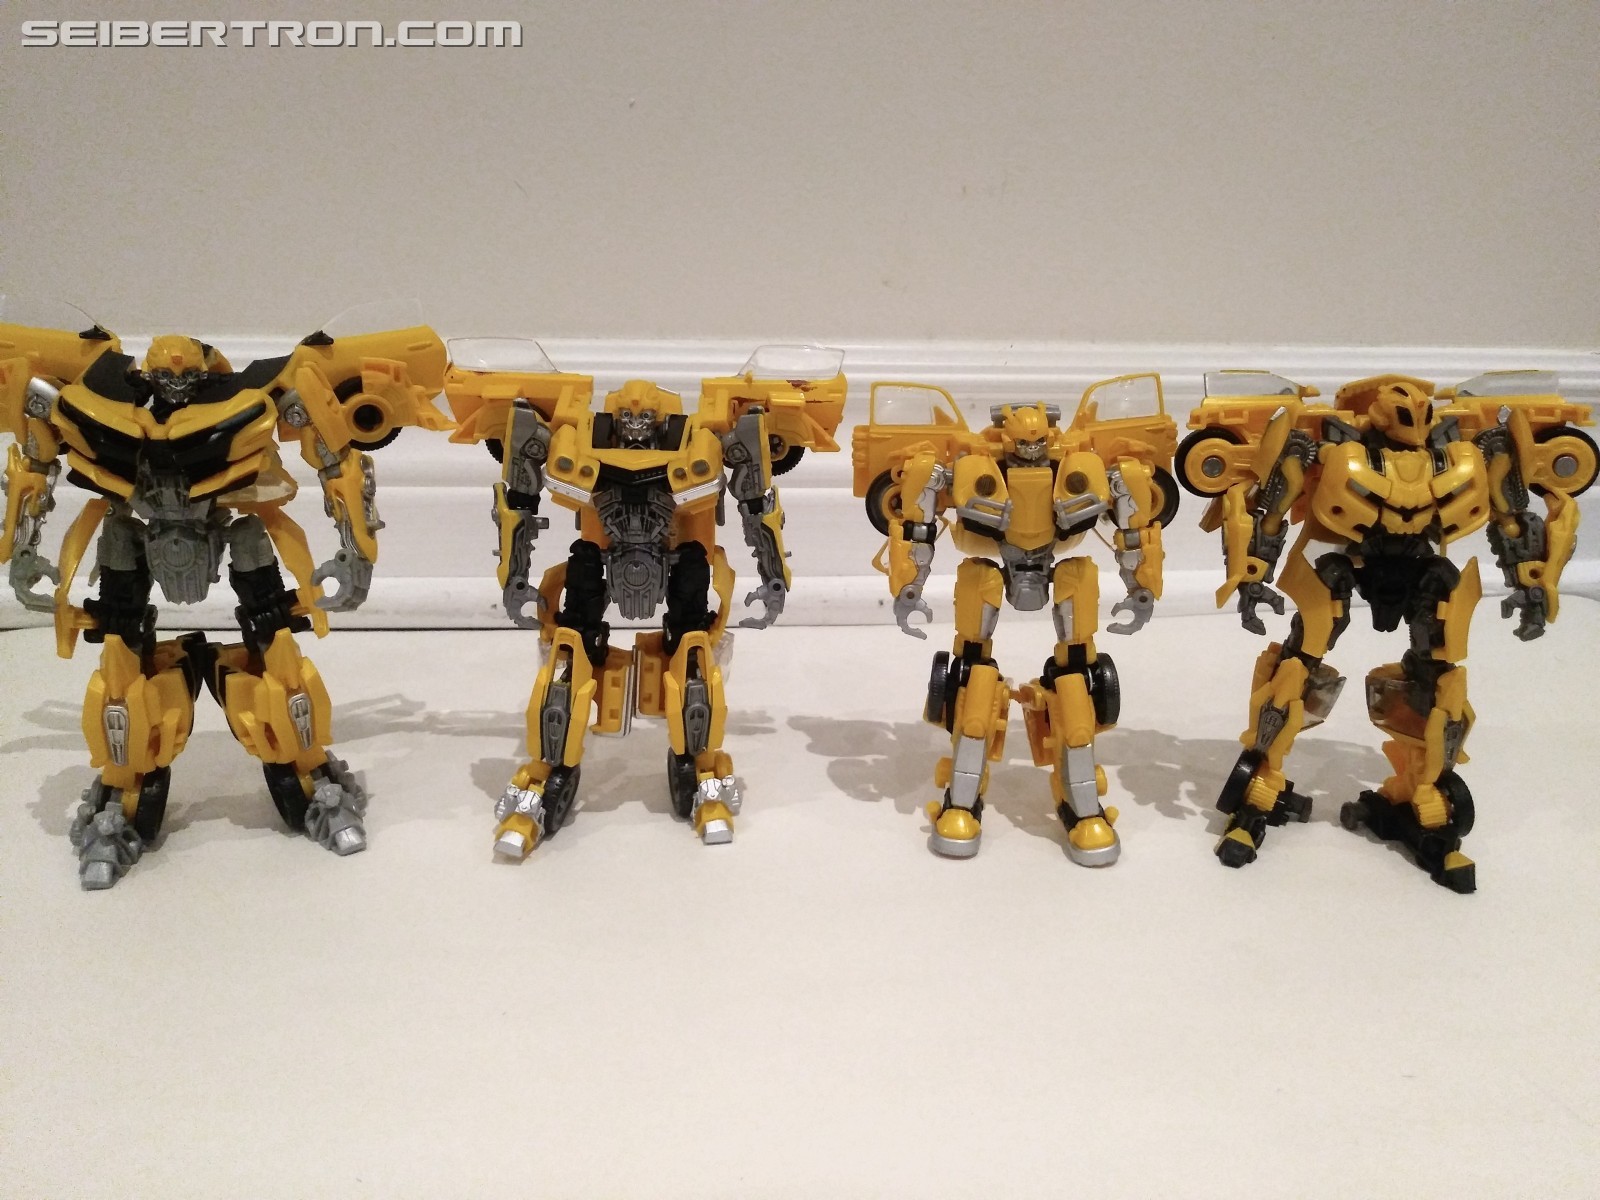 transformers 1 bumblebee toy